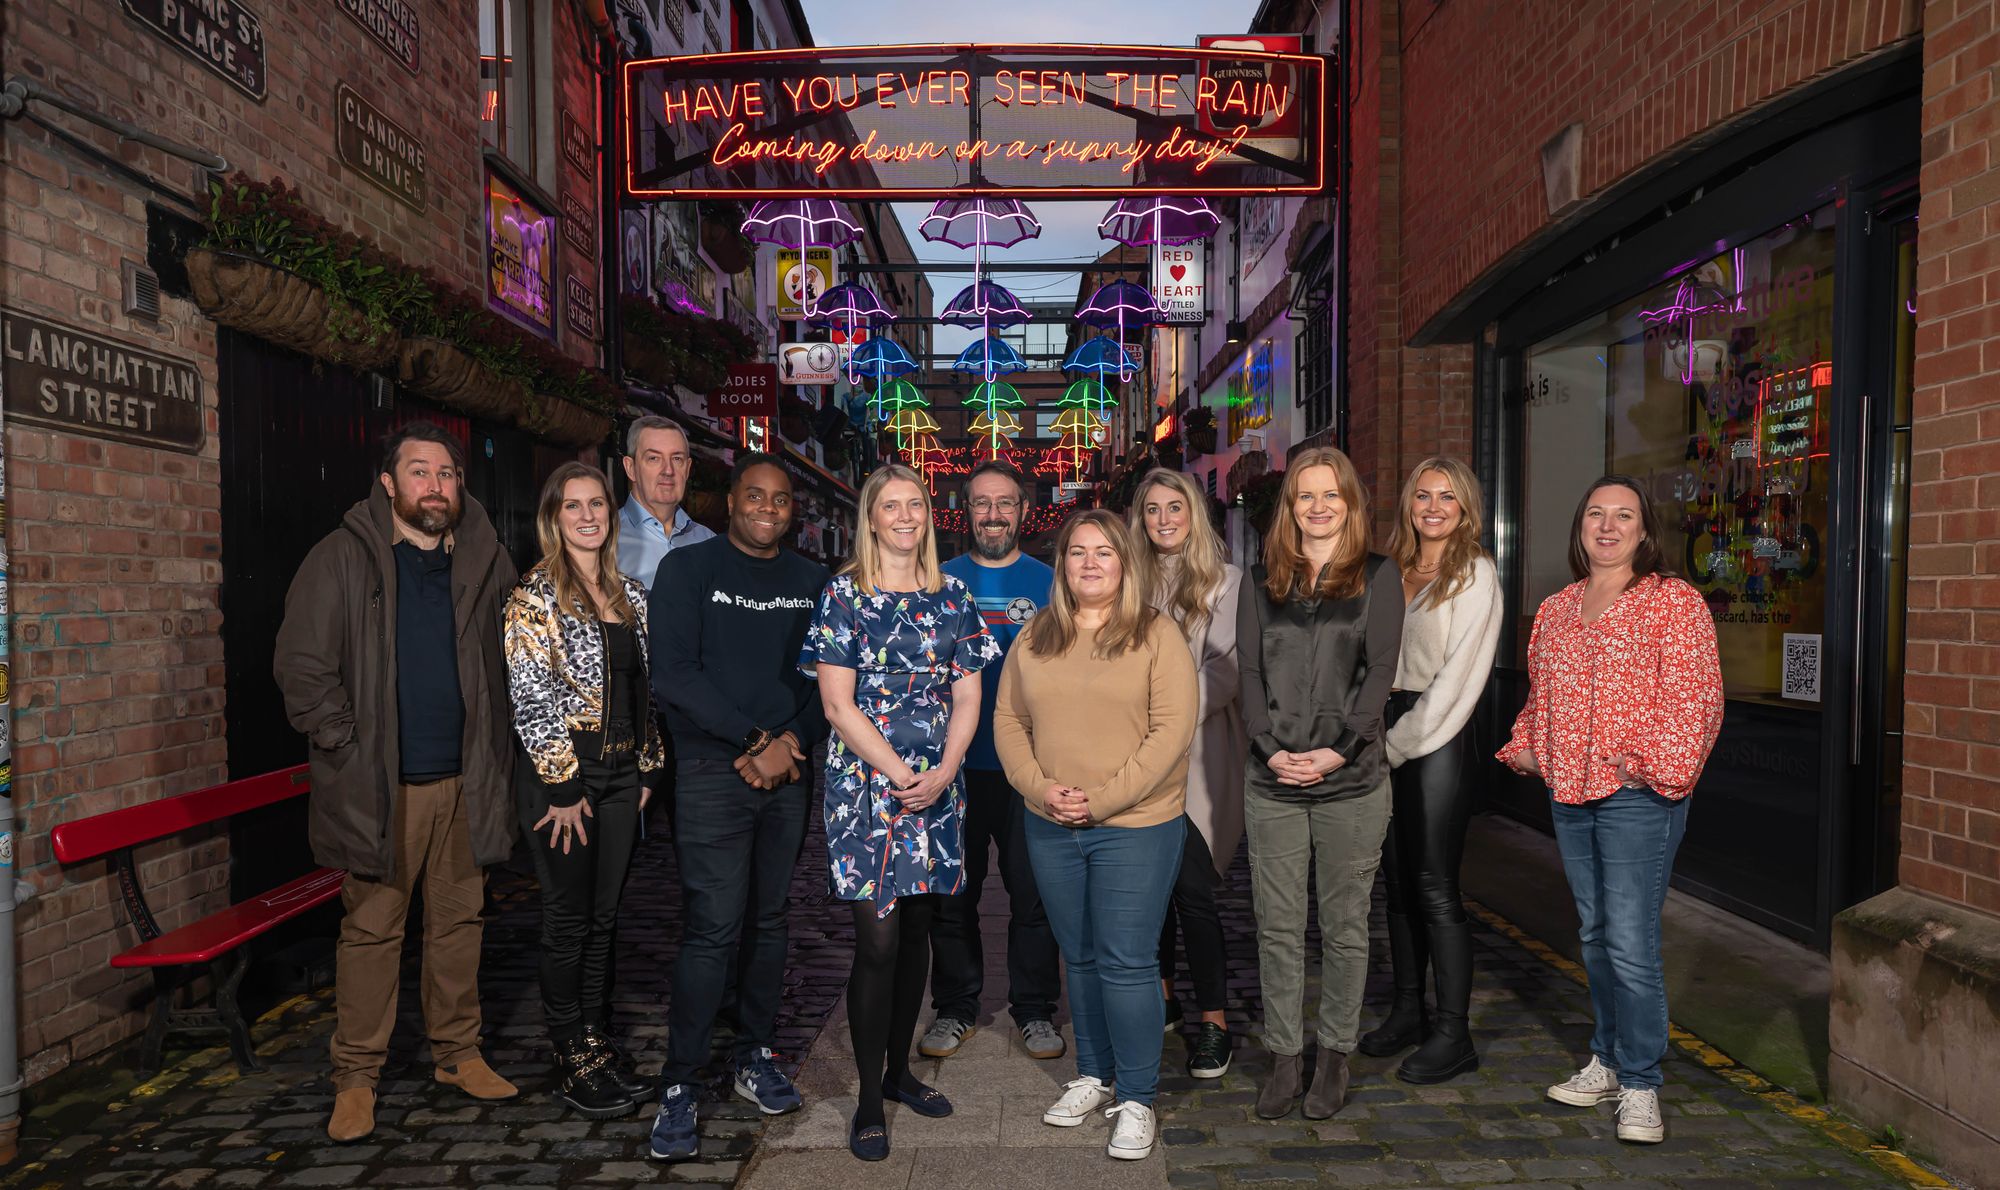 A group of individuals smiling for the camera in a decoratively lit alleyway